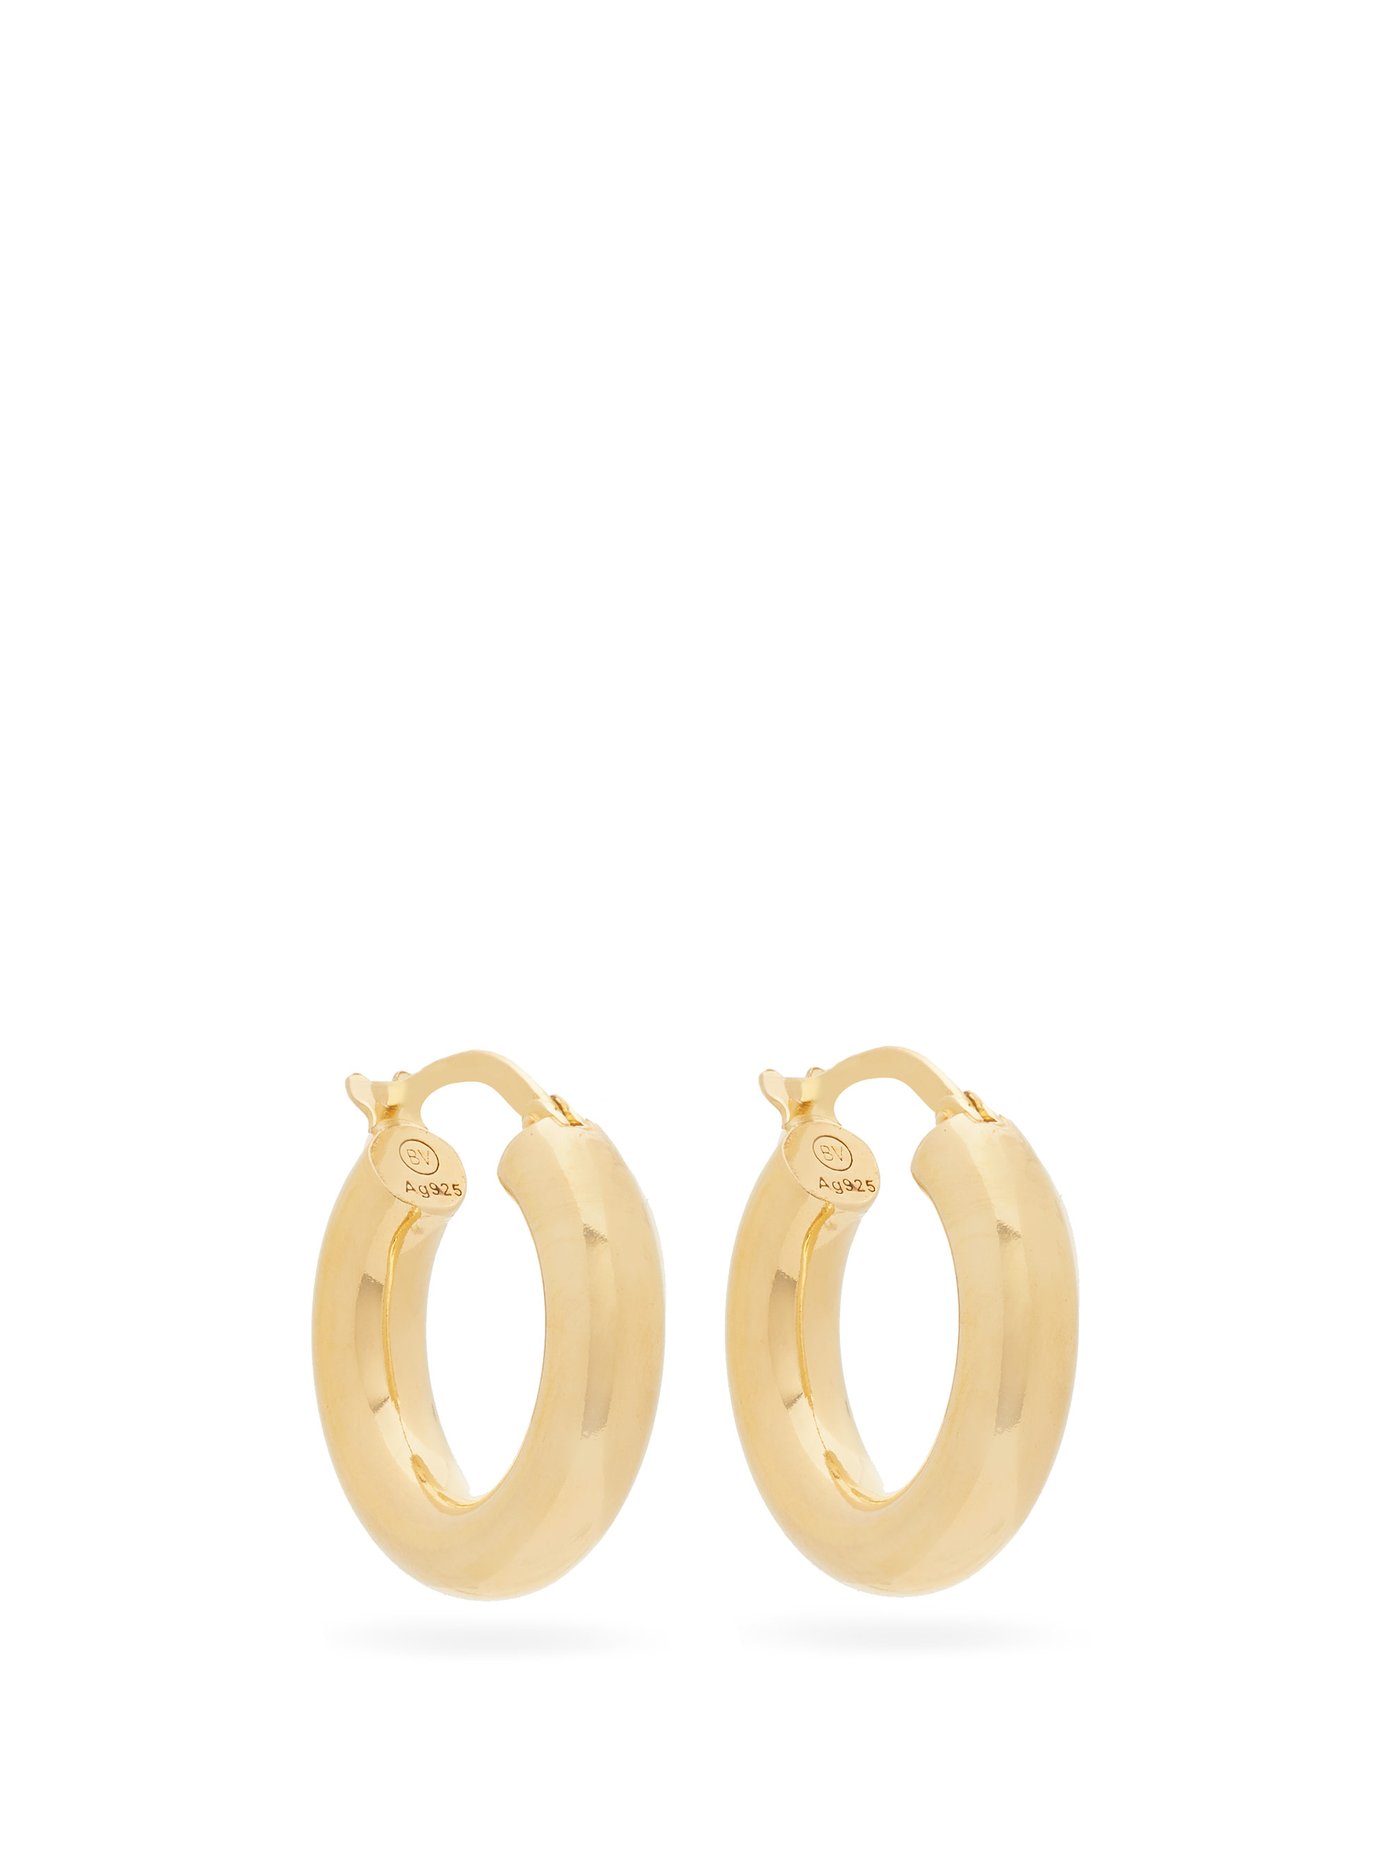 Small Gold Hoop Earrings Australia Outlet Shop, UP TO 54% OFF 